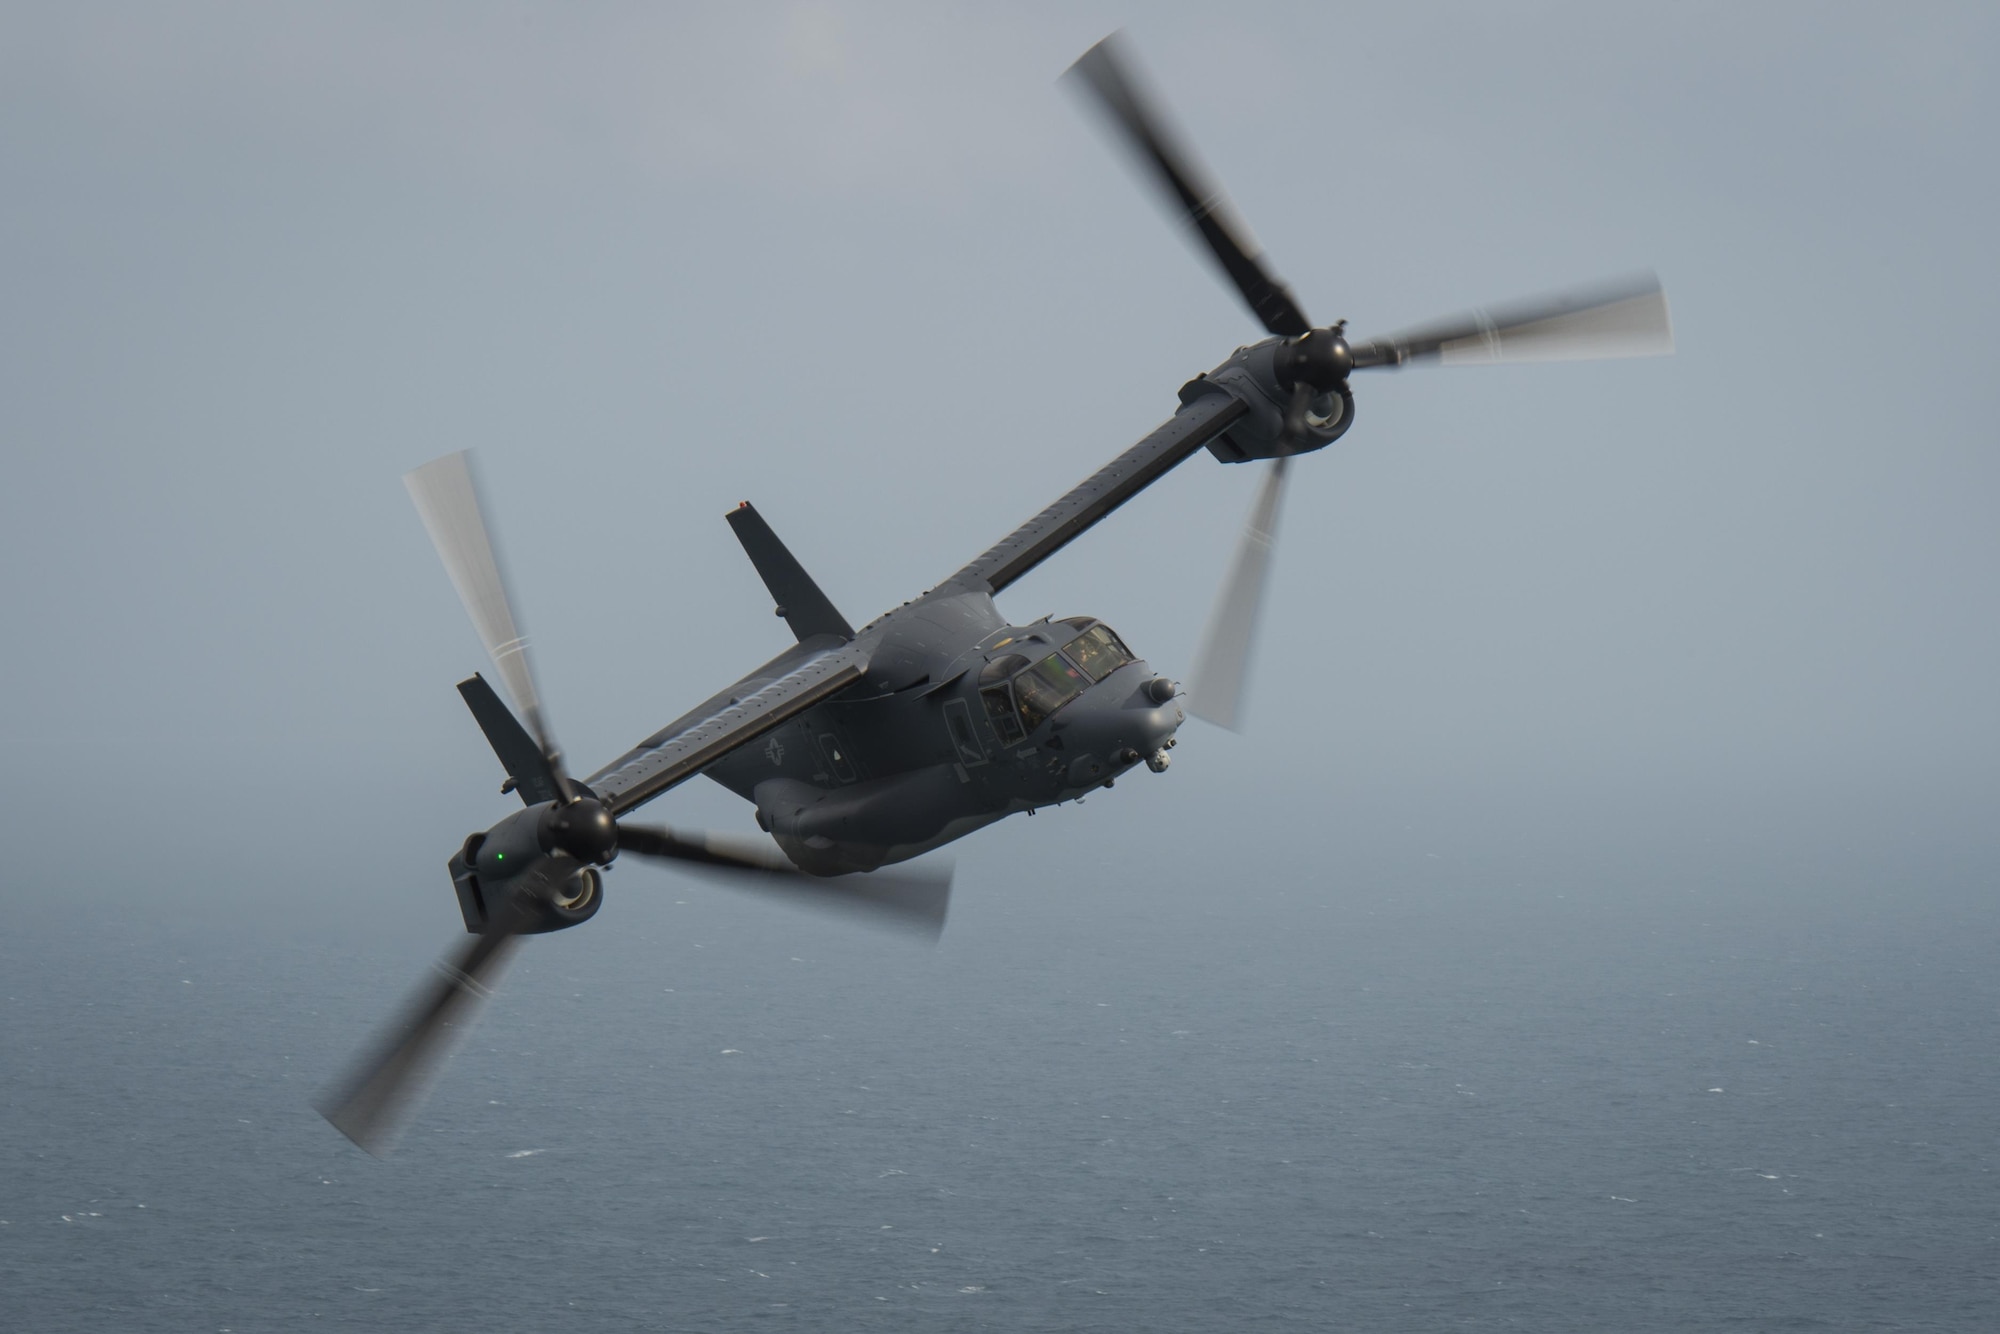 A CV-22 Osprey tiltrotor aircraft assigned to the 8th Special Operations Squadron flies over the Gulf of Mexico during a training mission, Nov. 30, 2016. The Osprey combines the vertical takeoff, landing and hover capabilities of a helicopter with the long-range, fuel efficient and speed characteristics of a turboprop aircraft. (U.S. Air Force photo by Airman 1st Class Joseph Pick)